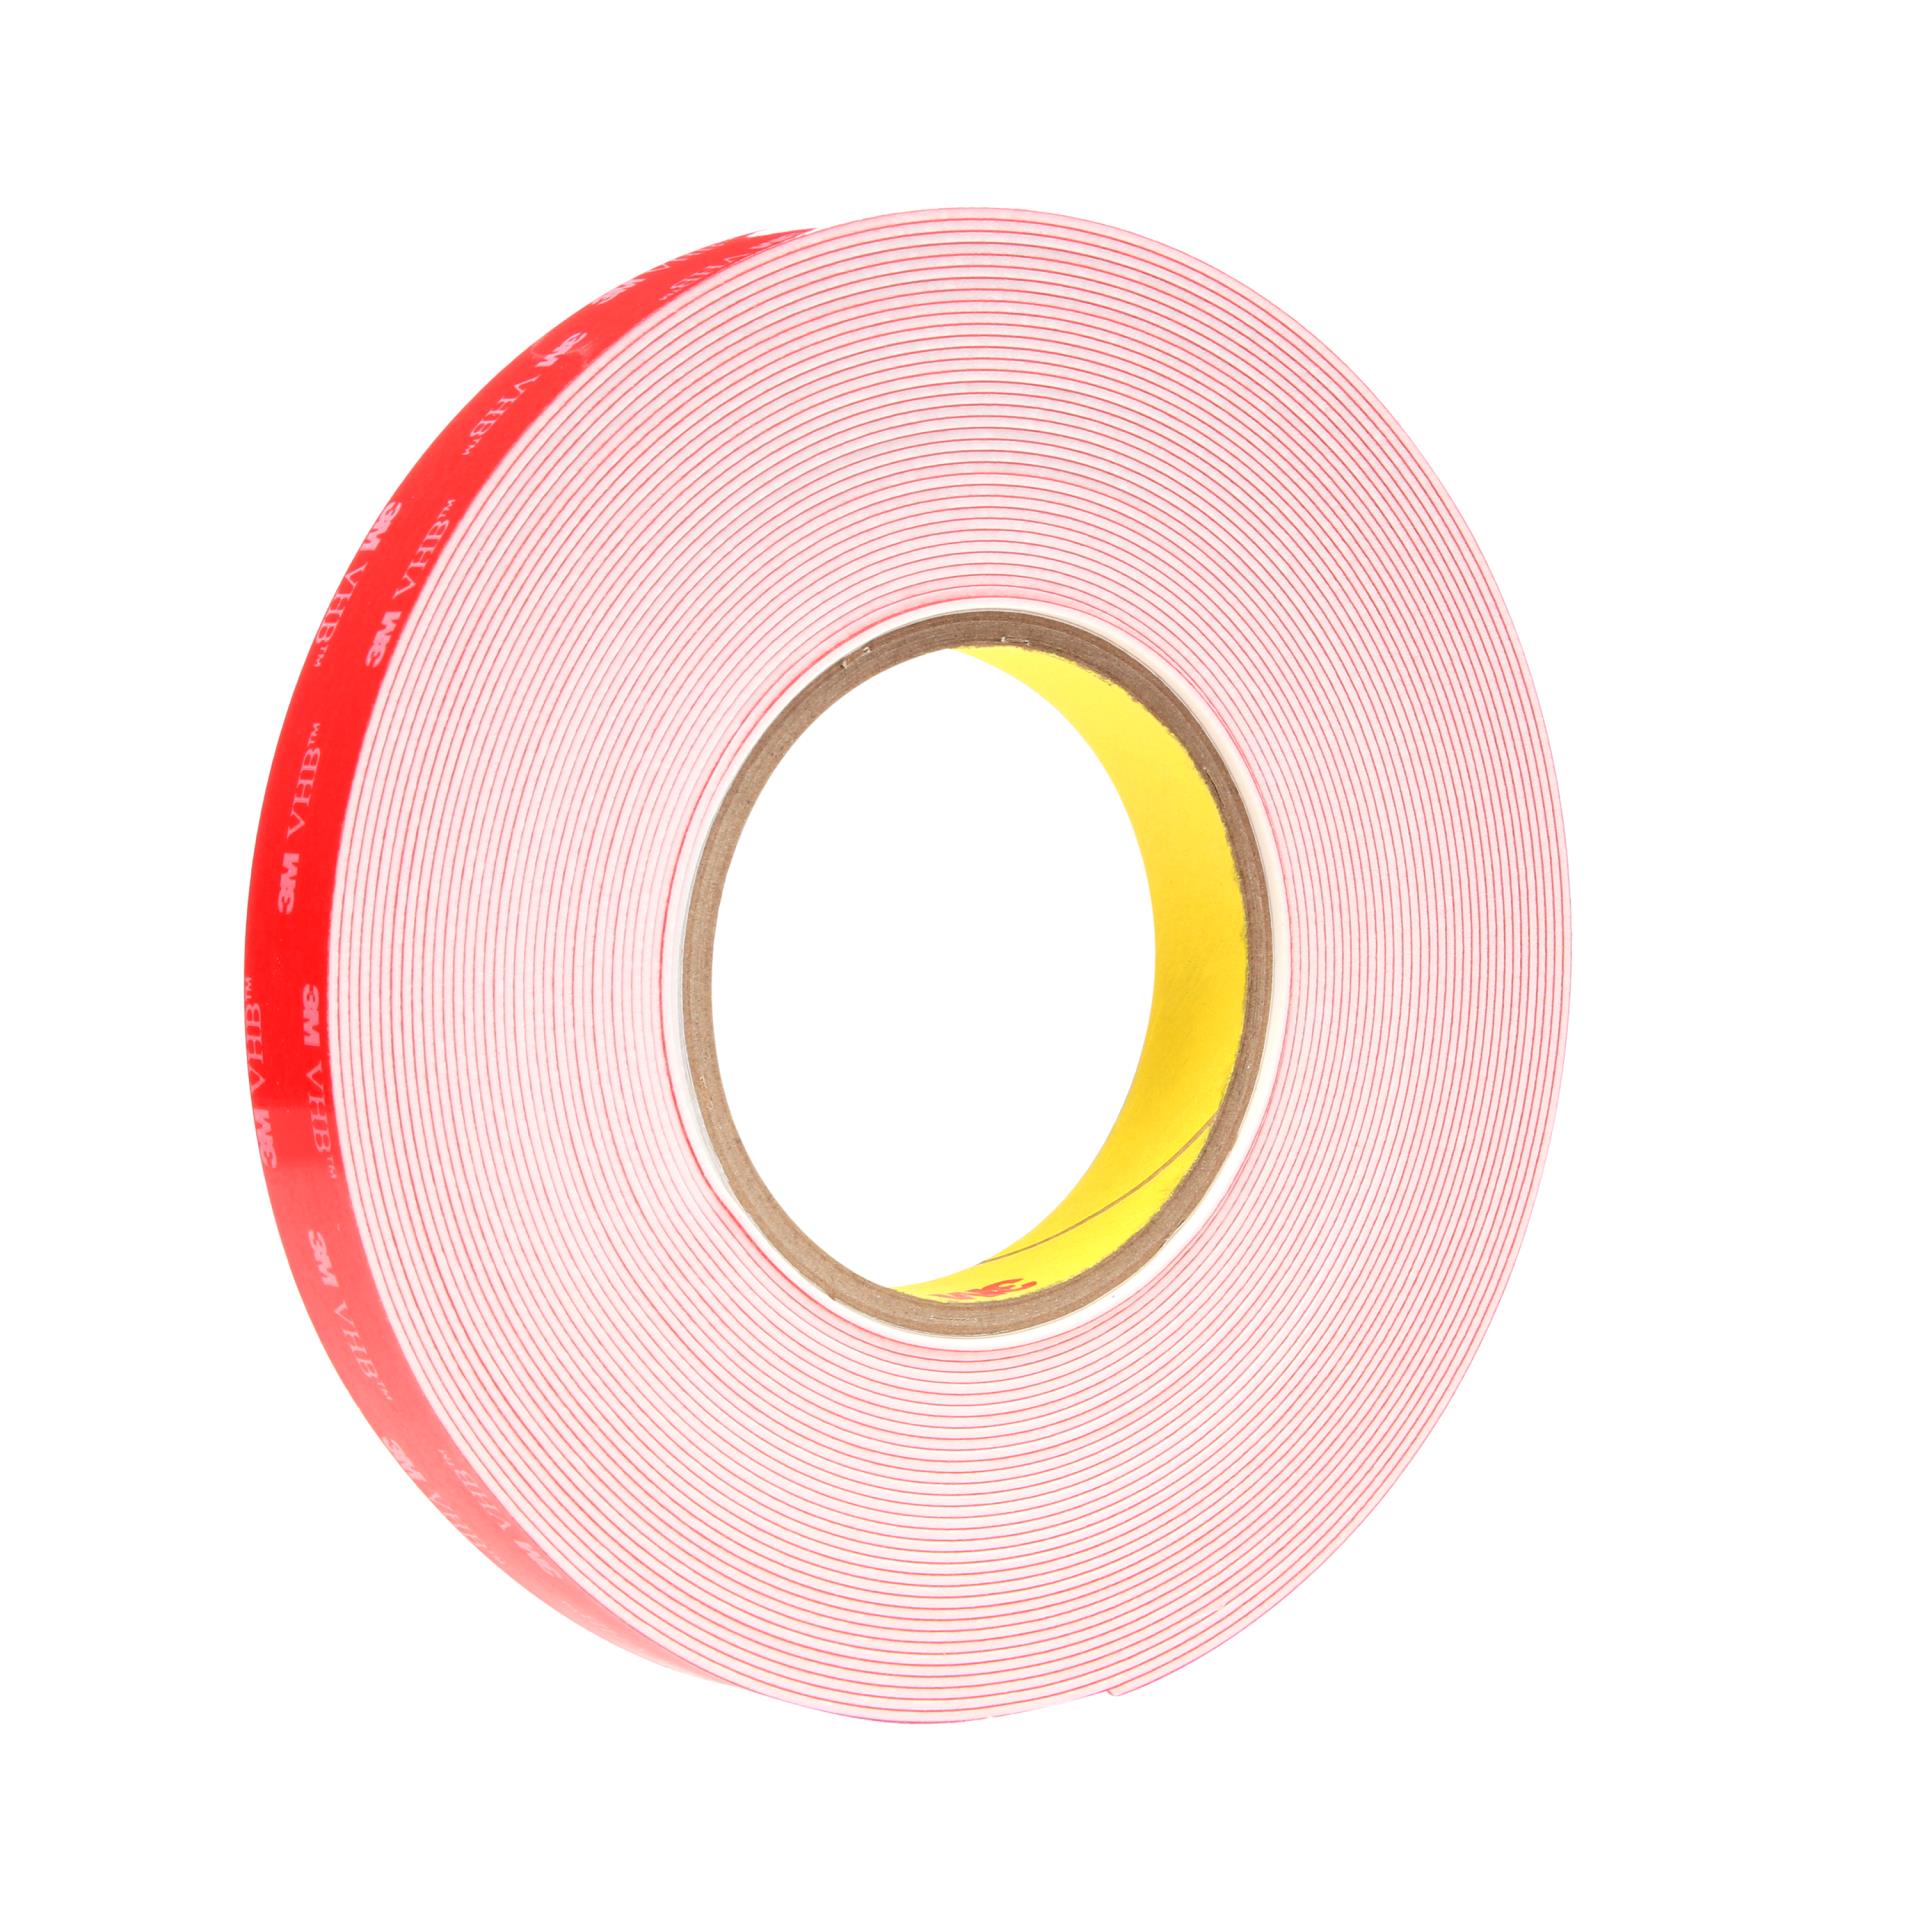 10m x 8mm 60mm Double Sided Adhesive Tape High Strength Acrylic Tape